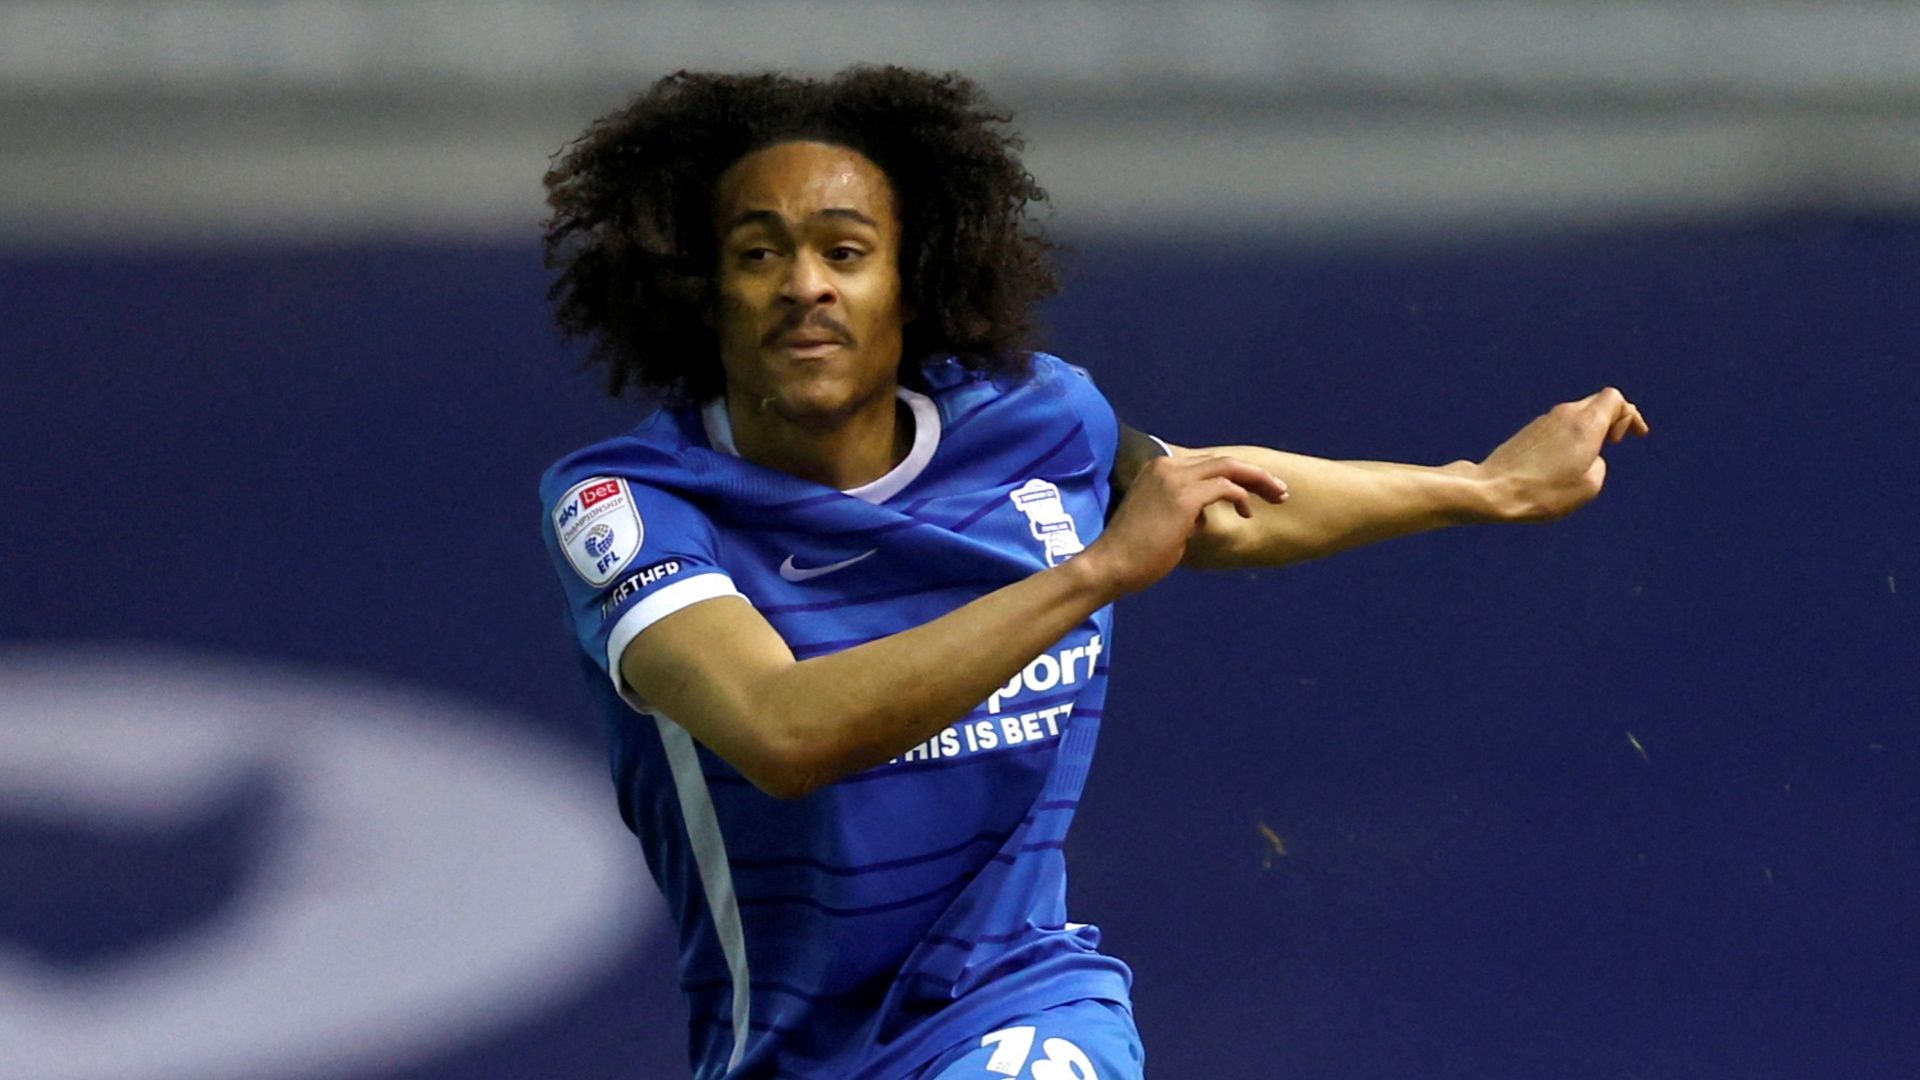 Total value of Birmingham City, Luton Town deal for Tahith Chong